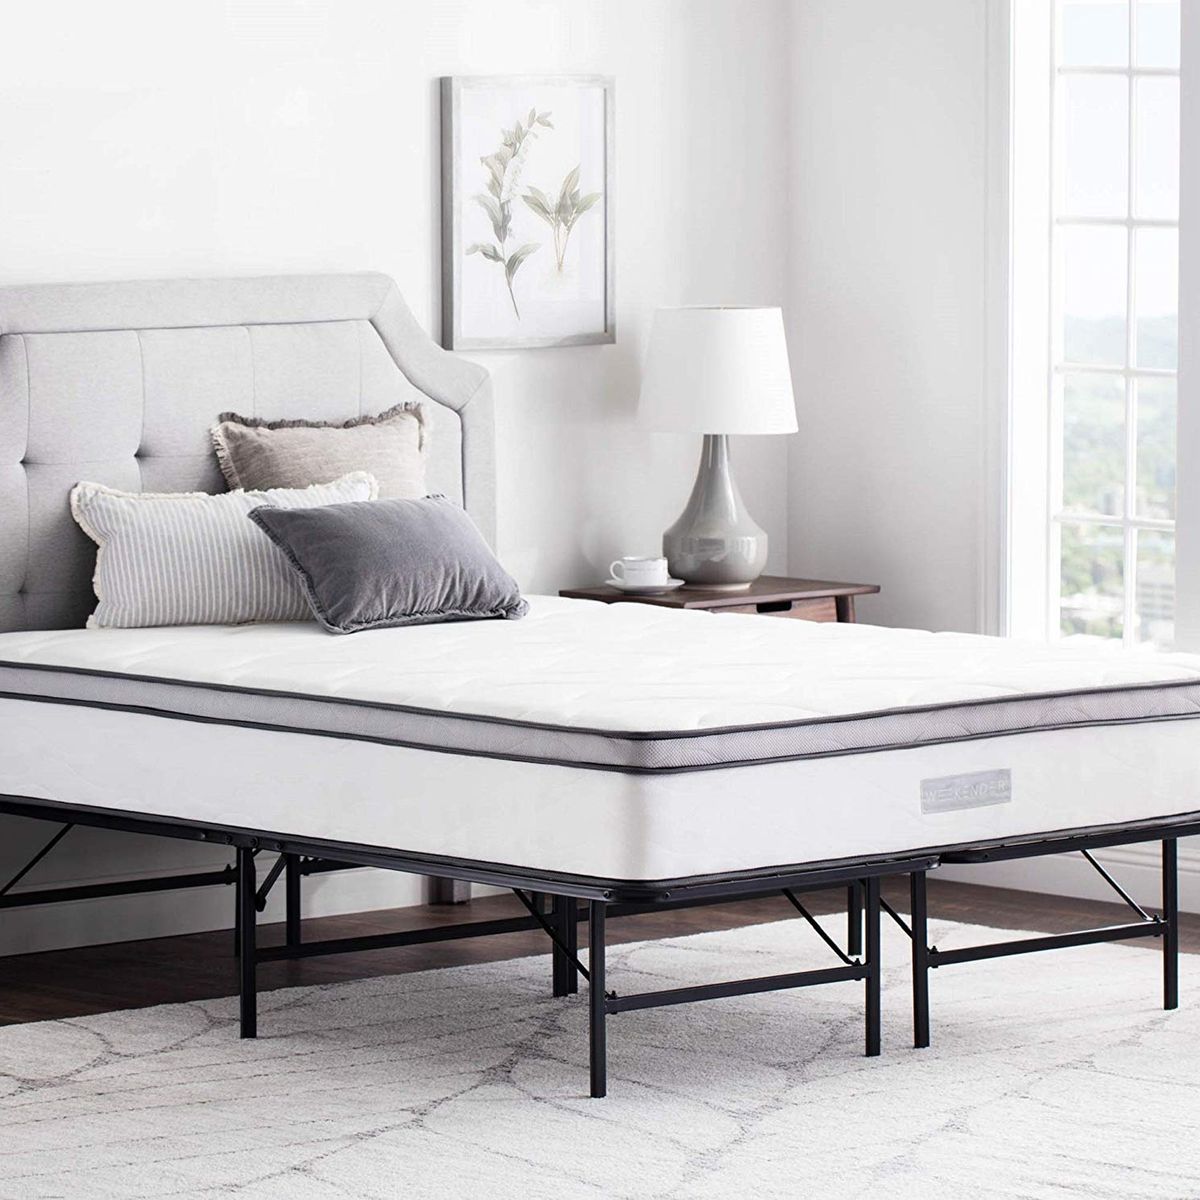 19 Best Metal Bed Frames 2020 The, How Long Is A Full Bed Frame